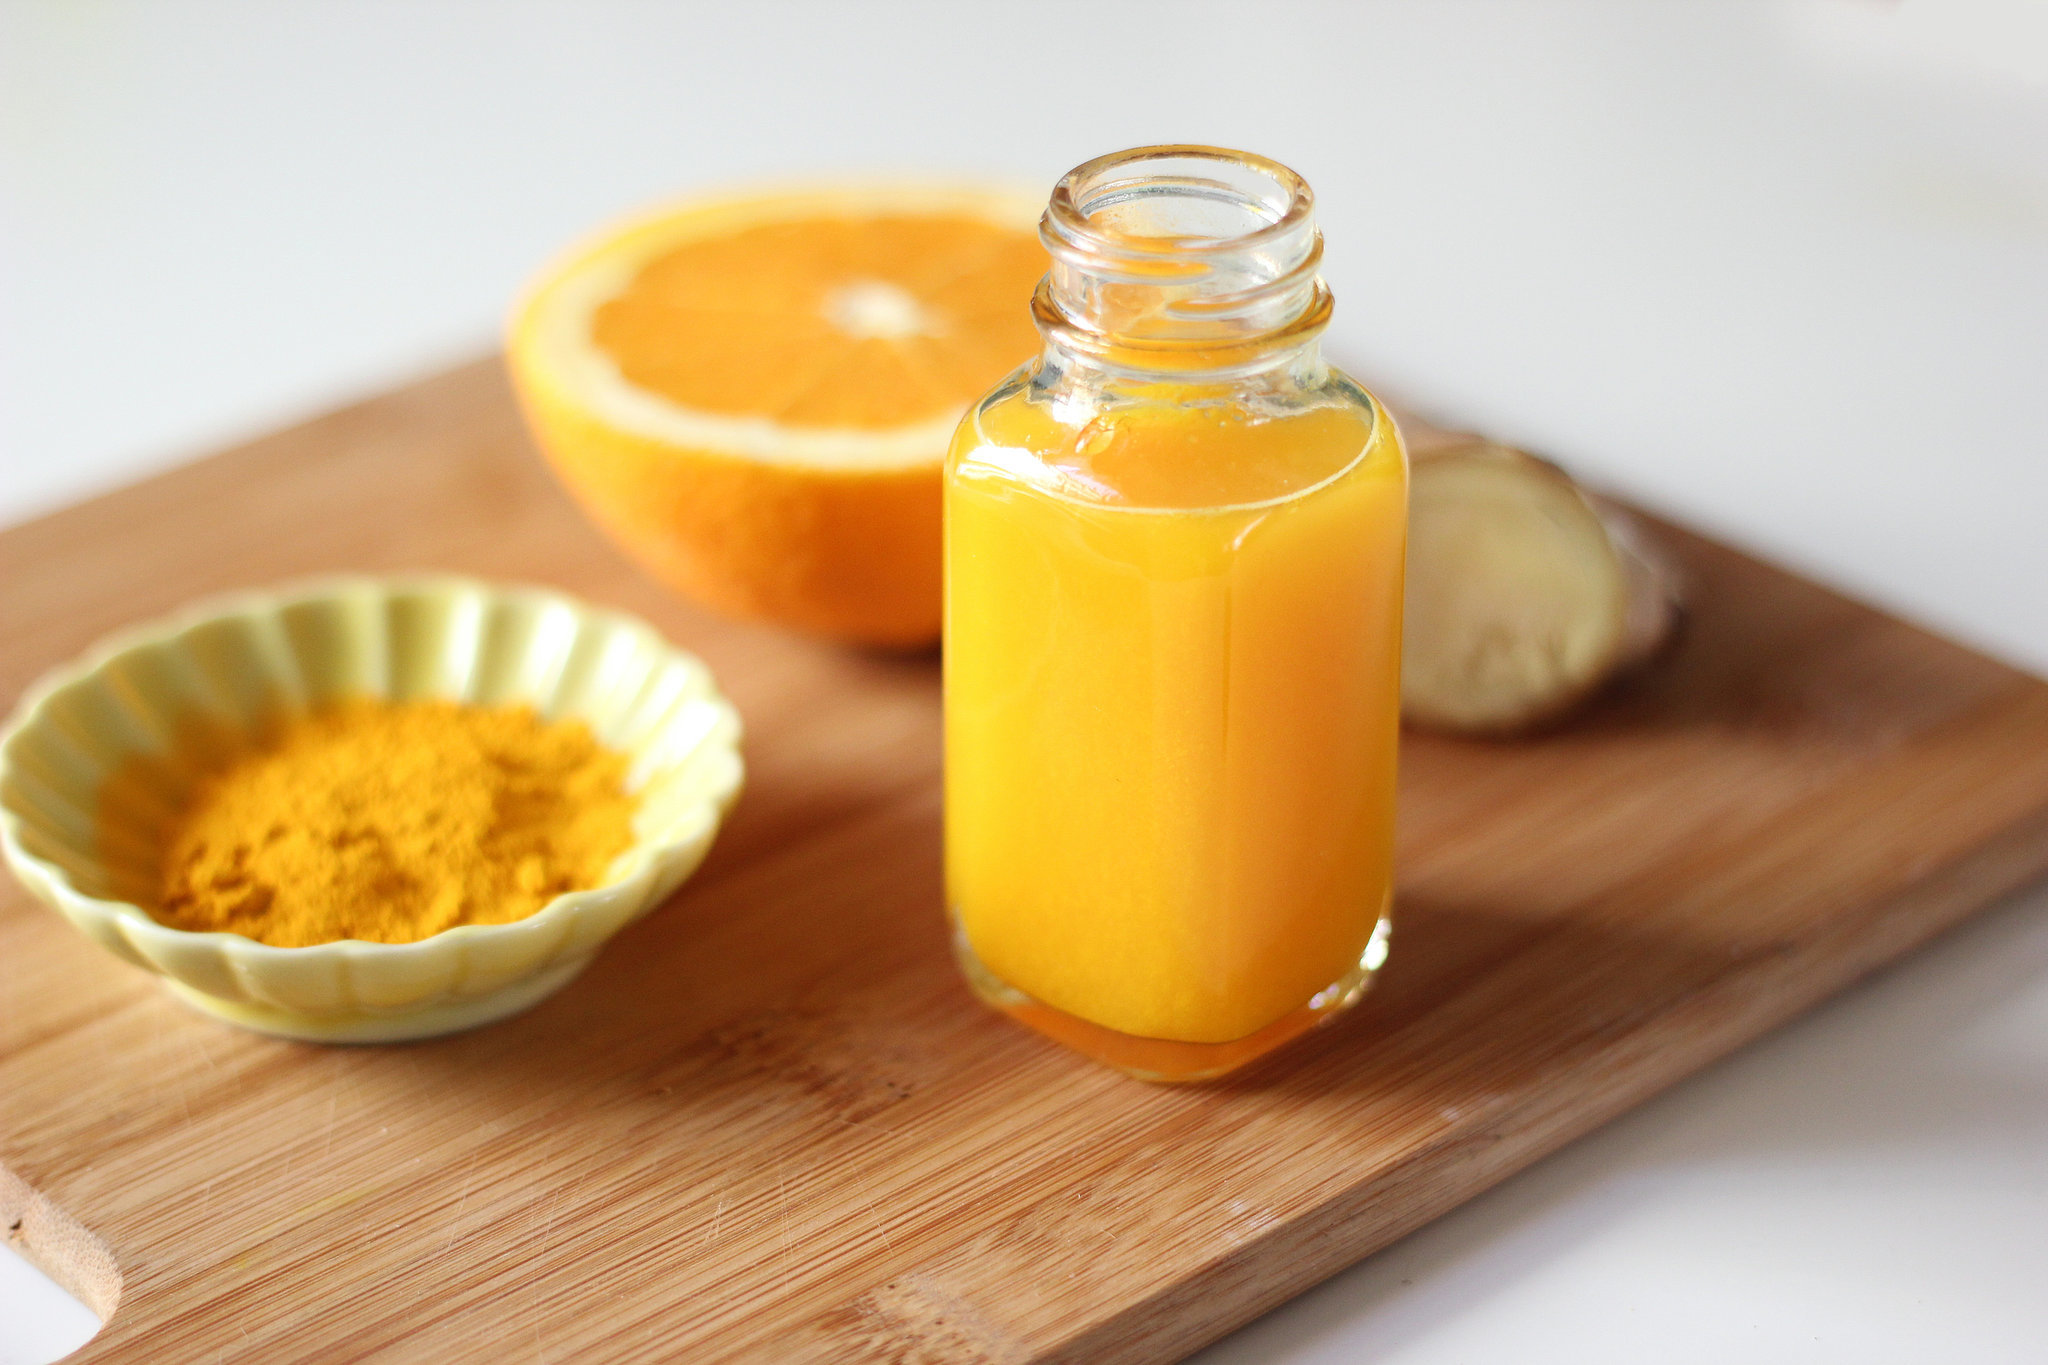 Prevent Colds With This Quick and Easy Immunity-Boosting Tonic